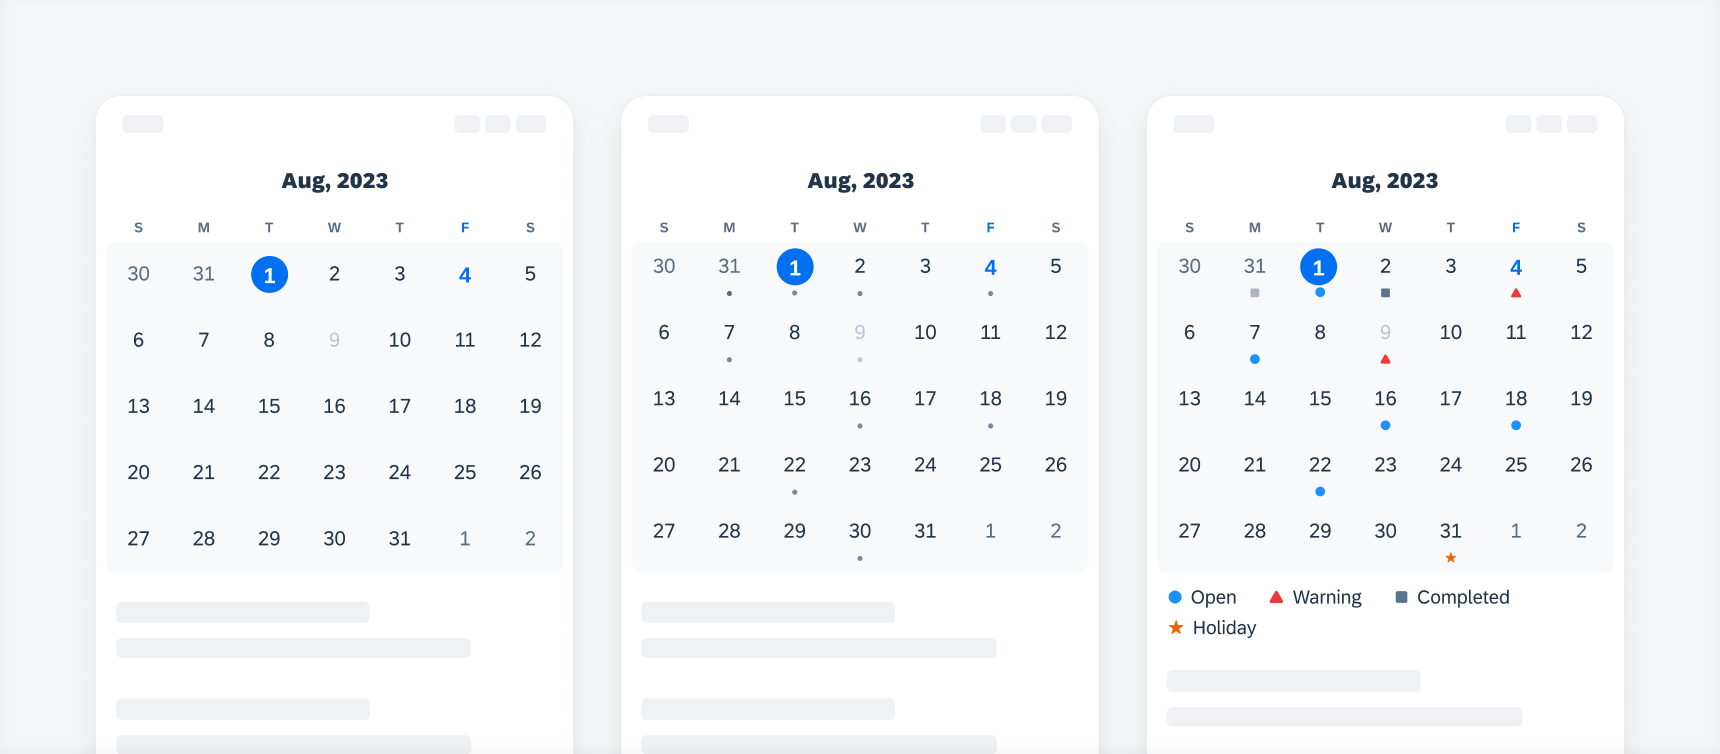 Calendar view that shows (from left to right): numbers only, numbers with a dot indicator, and numbers with an icon indicator